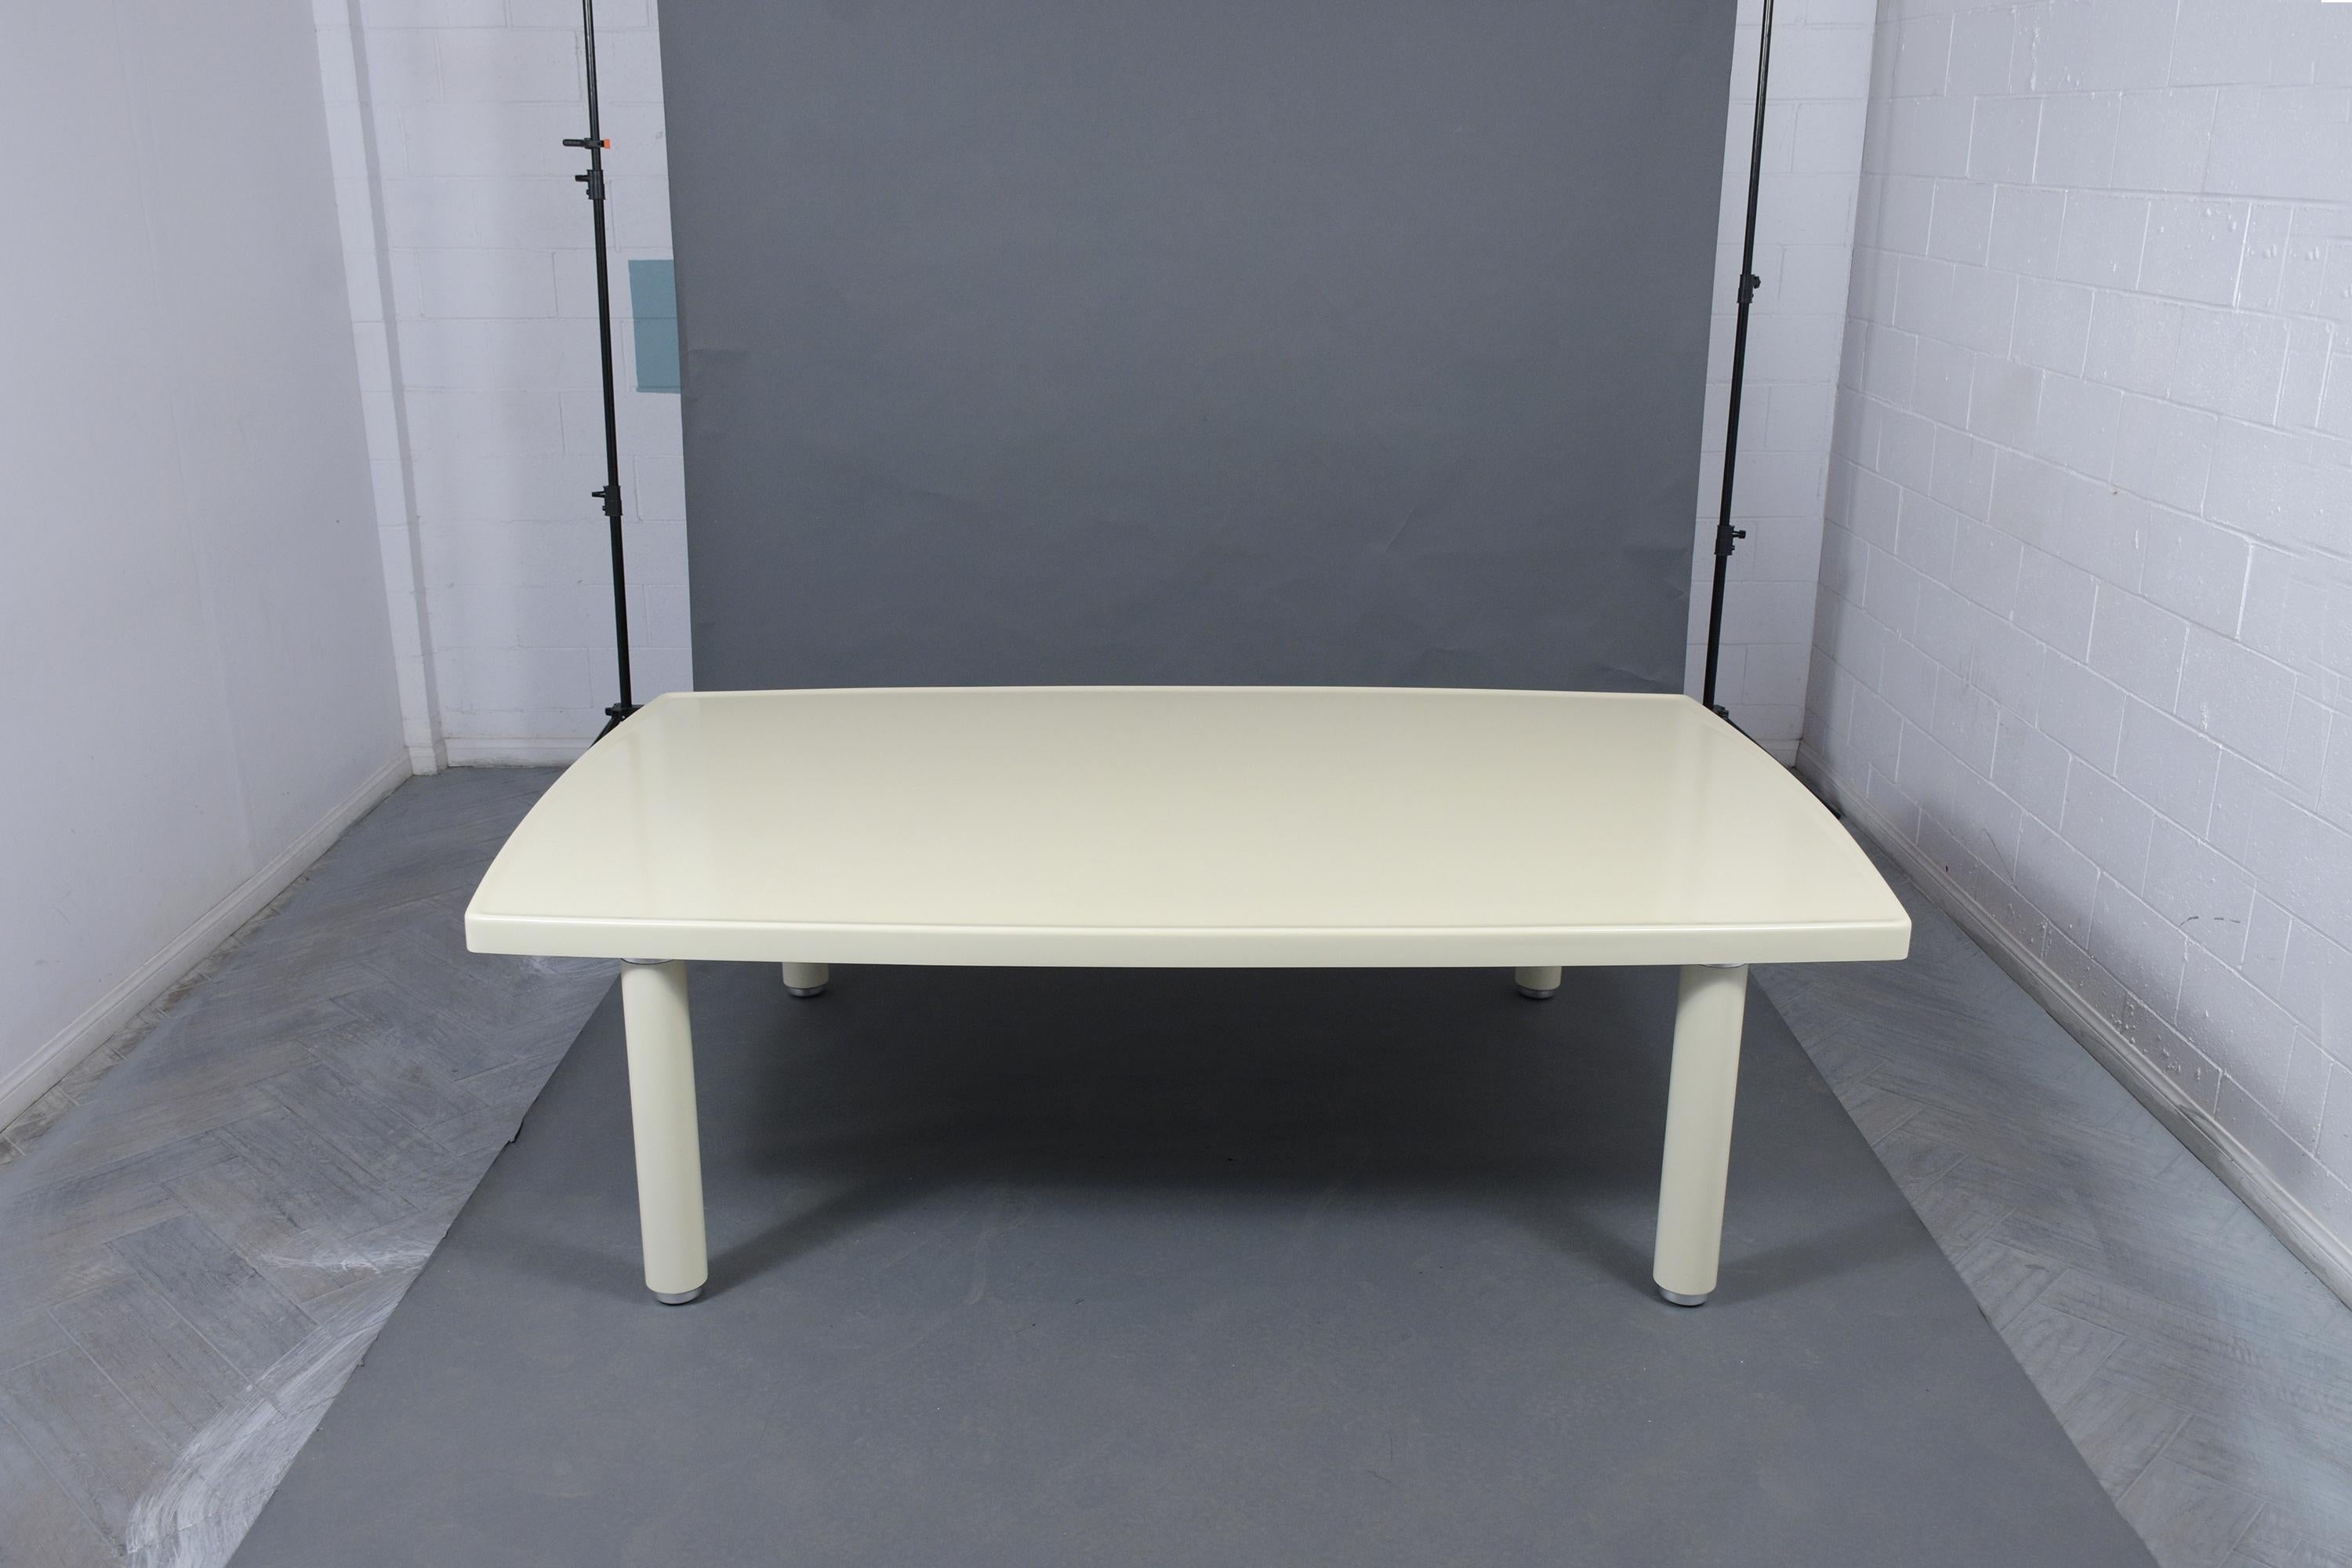 Stewart MacDougall Ivory Cream Dining Table with Silvered Leg Details In Good Condition For Sale In Los Angeles, CA